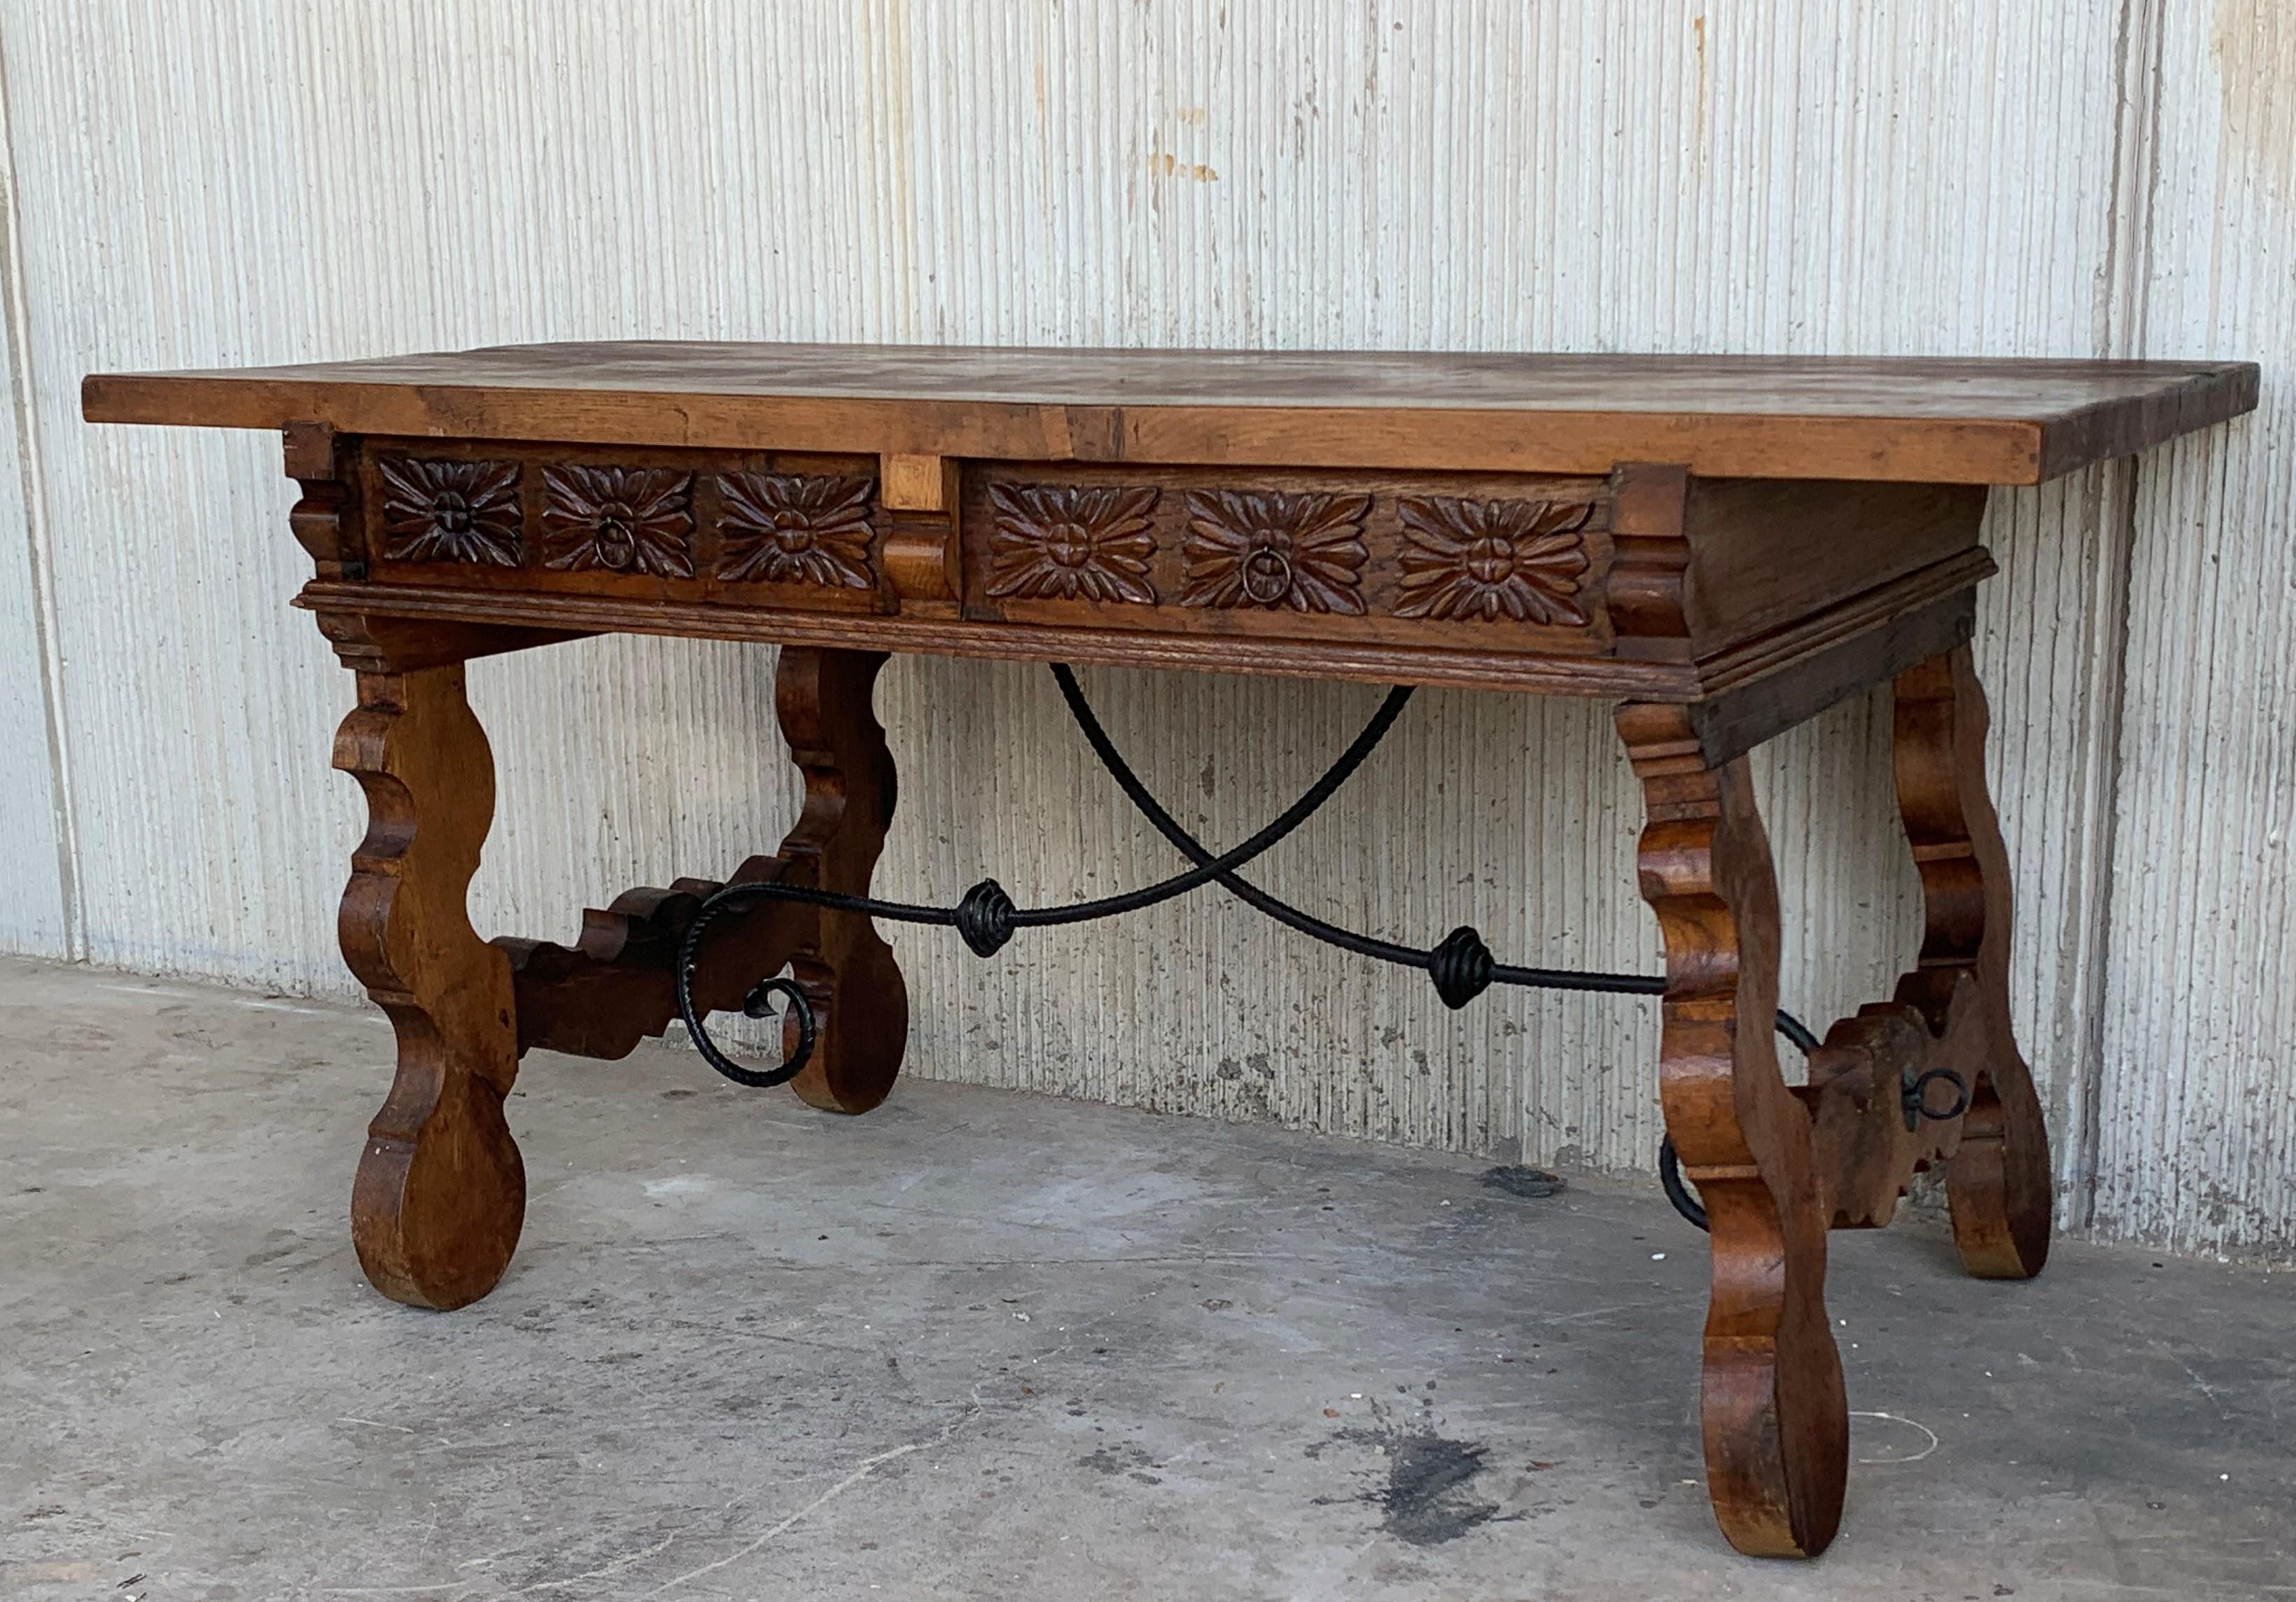 19th Century 19th Catalan Spanish Desk or Console Table in Carved Walnut and Iron Stretcher